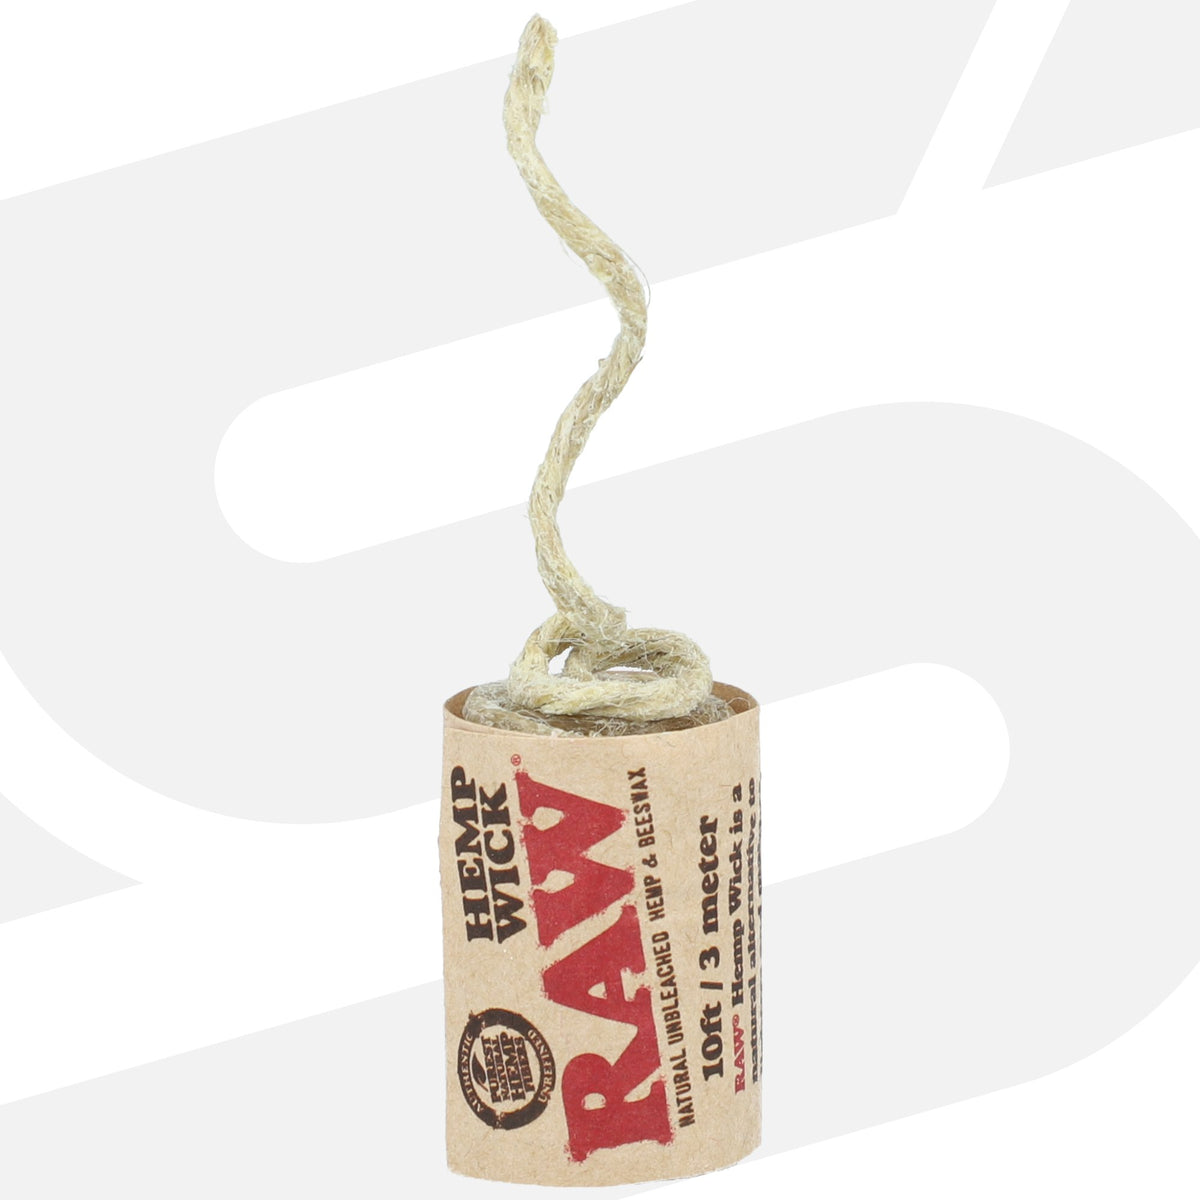 RAW Hemp Wick Spool 10-20ft Accessories esd-official